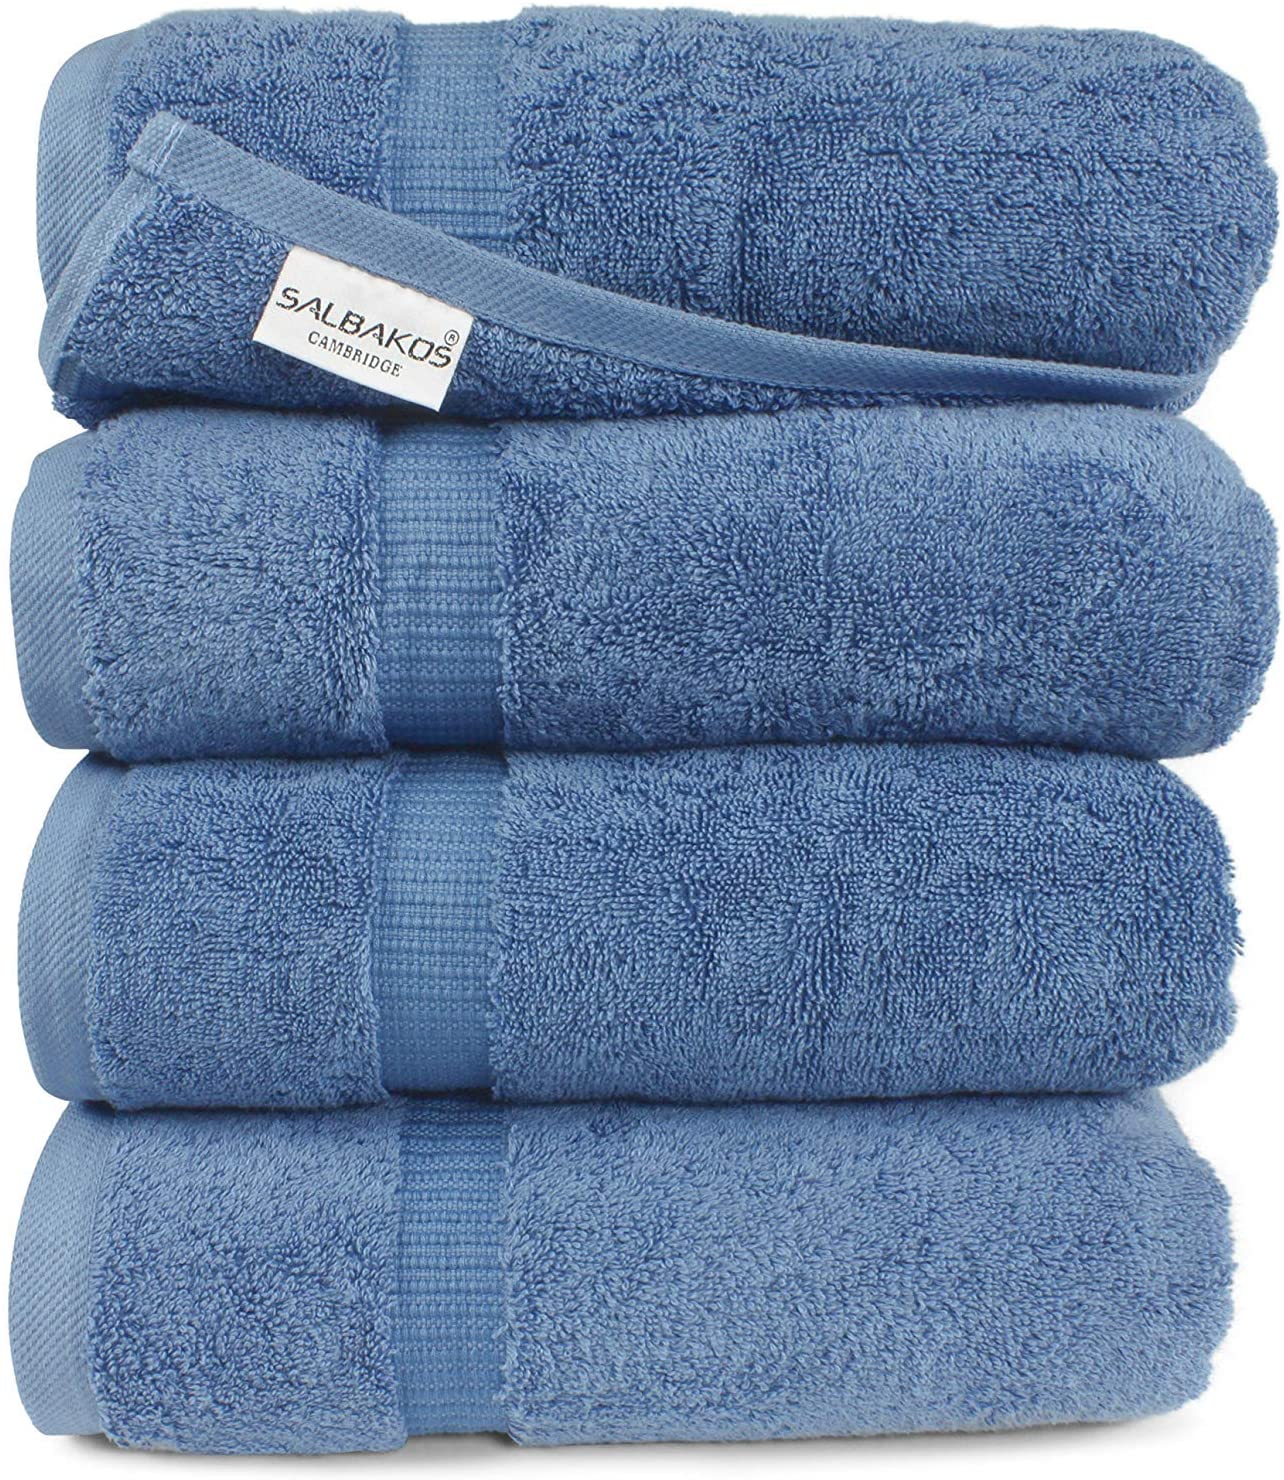 SALBAKOS Double-Stitched Turkish Cotton Towels, Set Of 4